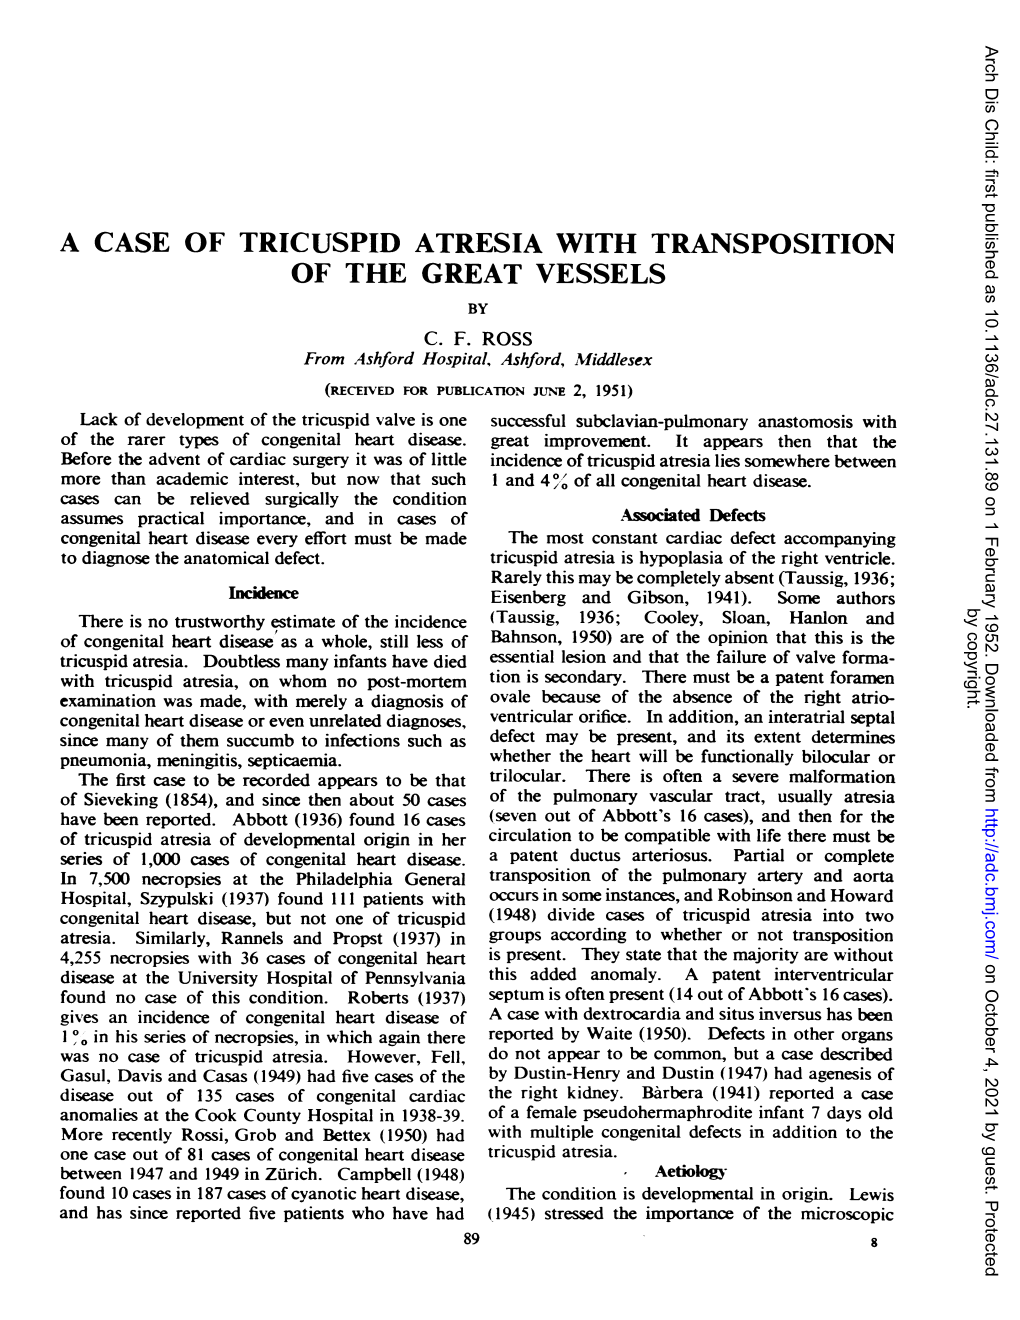 A Case of Tricuspid Atresia with Transposition of the Great Vessels by C